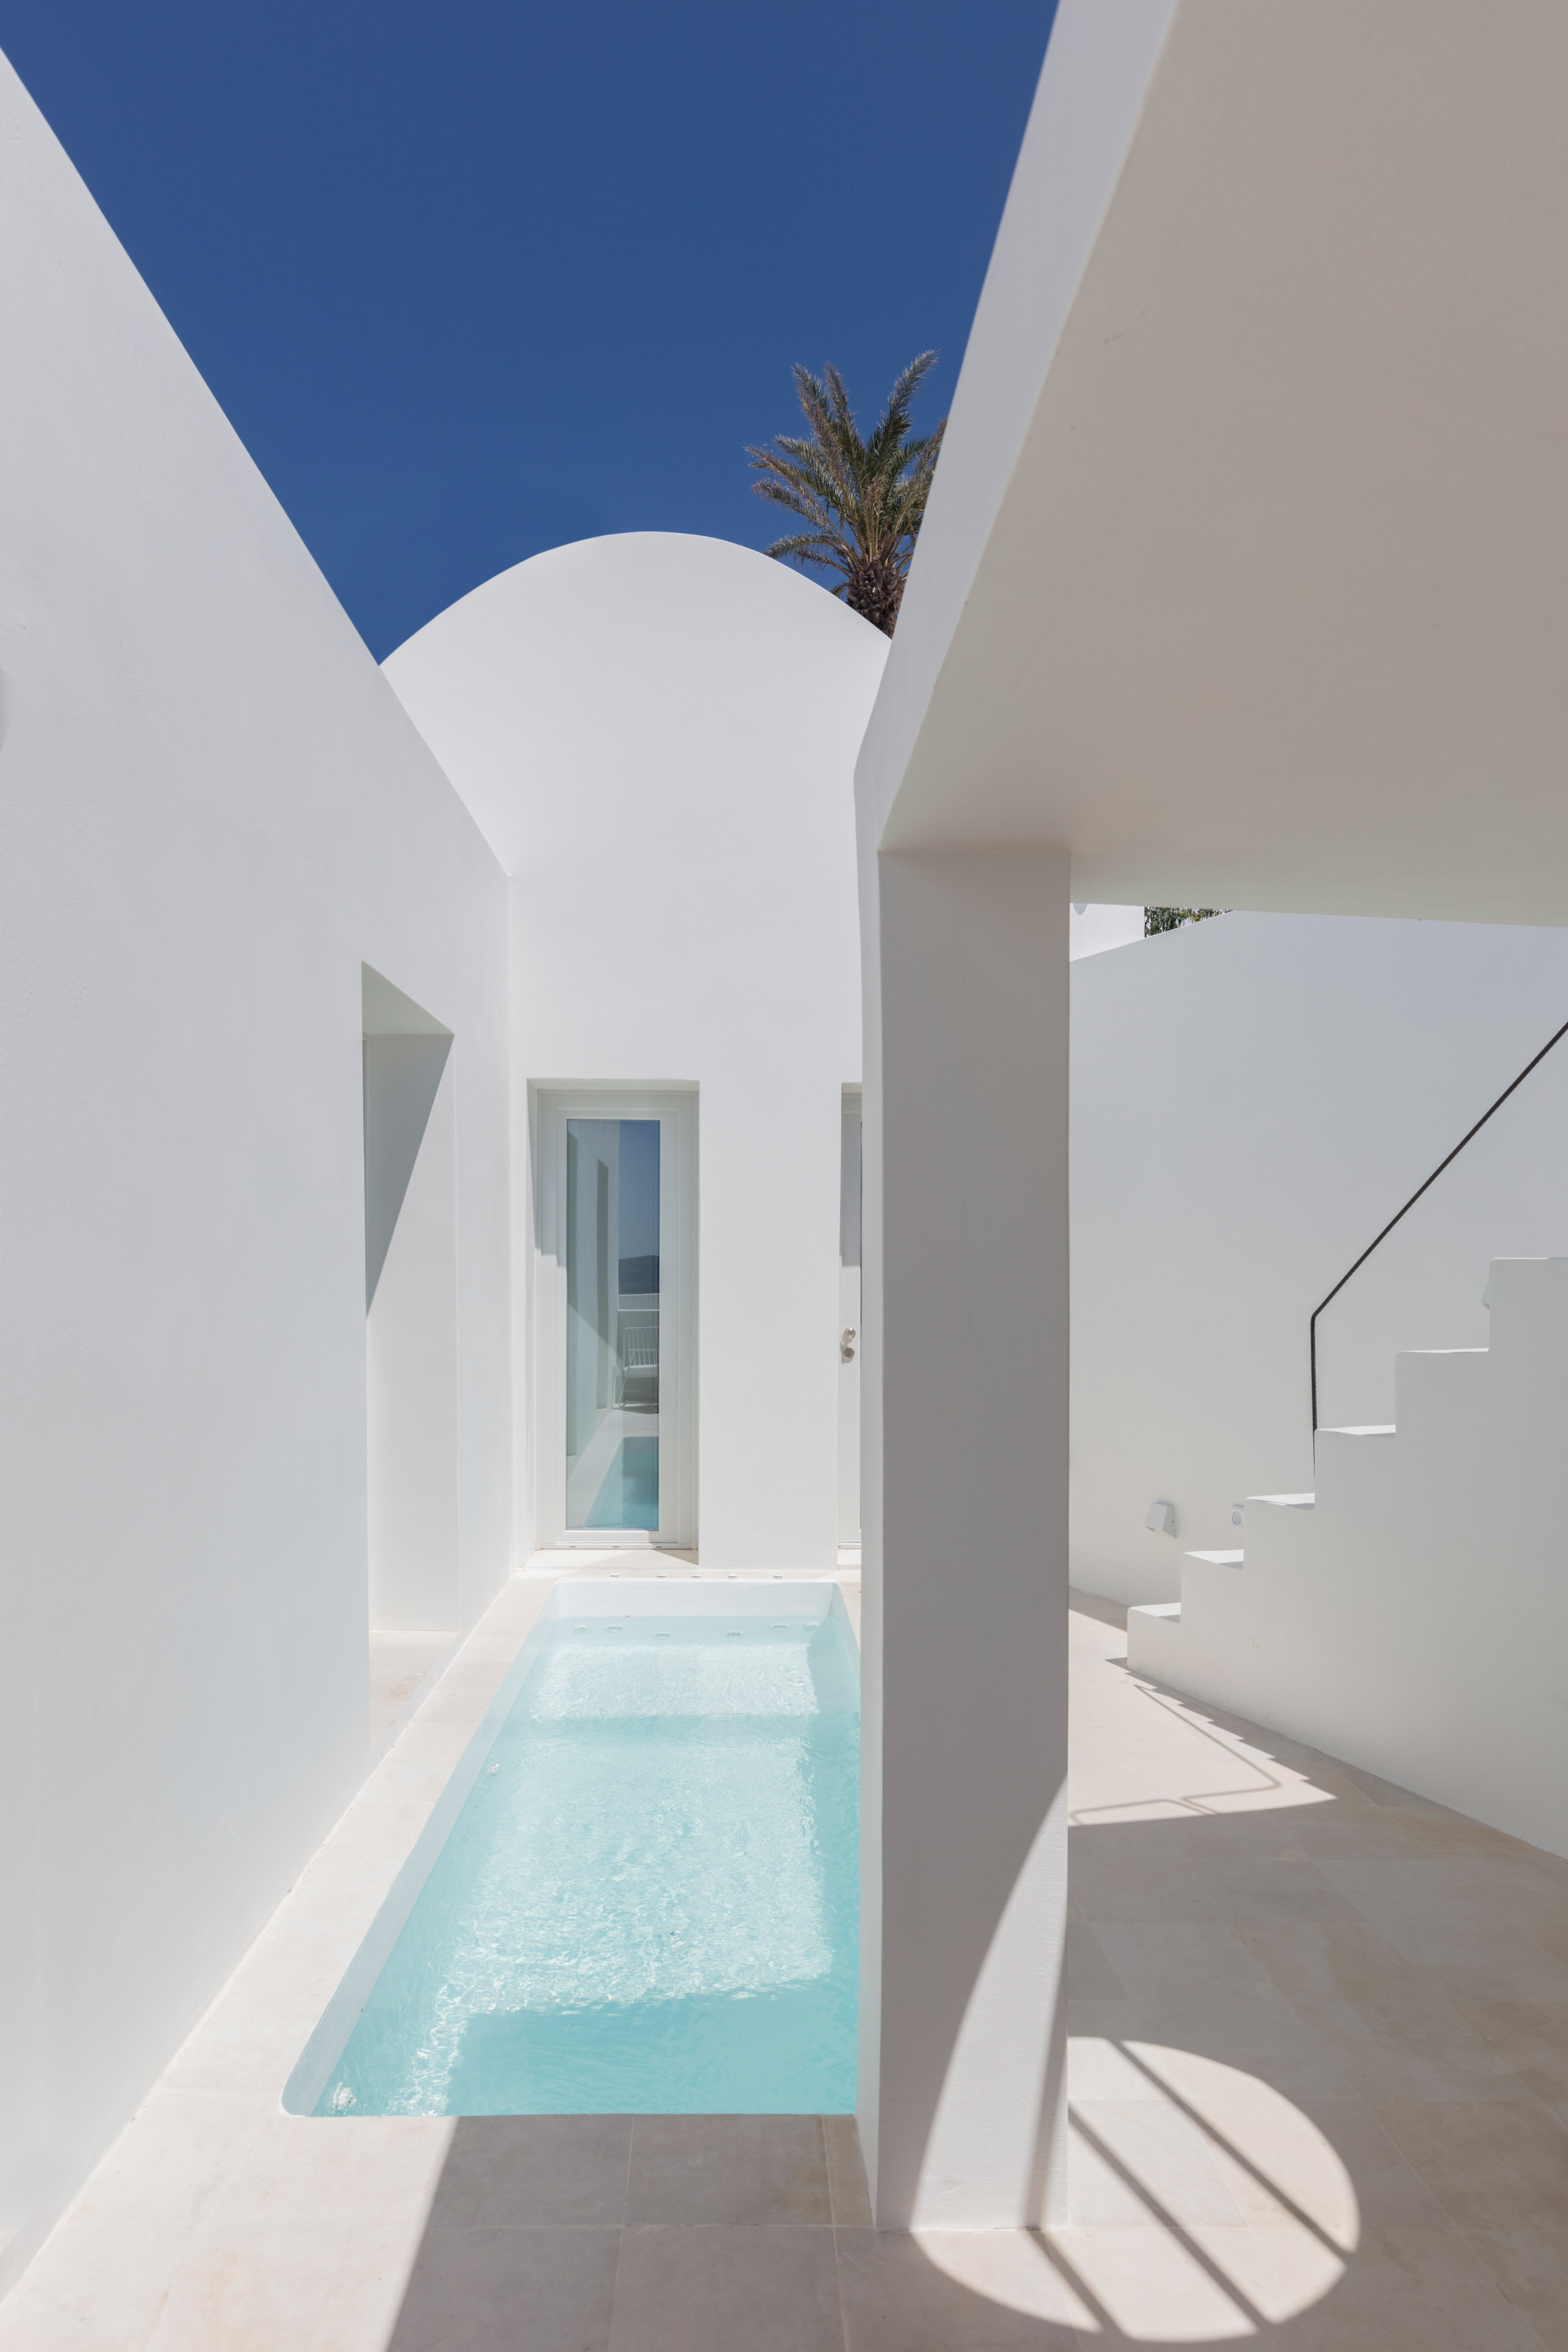 Two holiday residences in Fira caves by Kapsimalis Architects